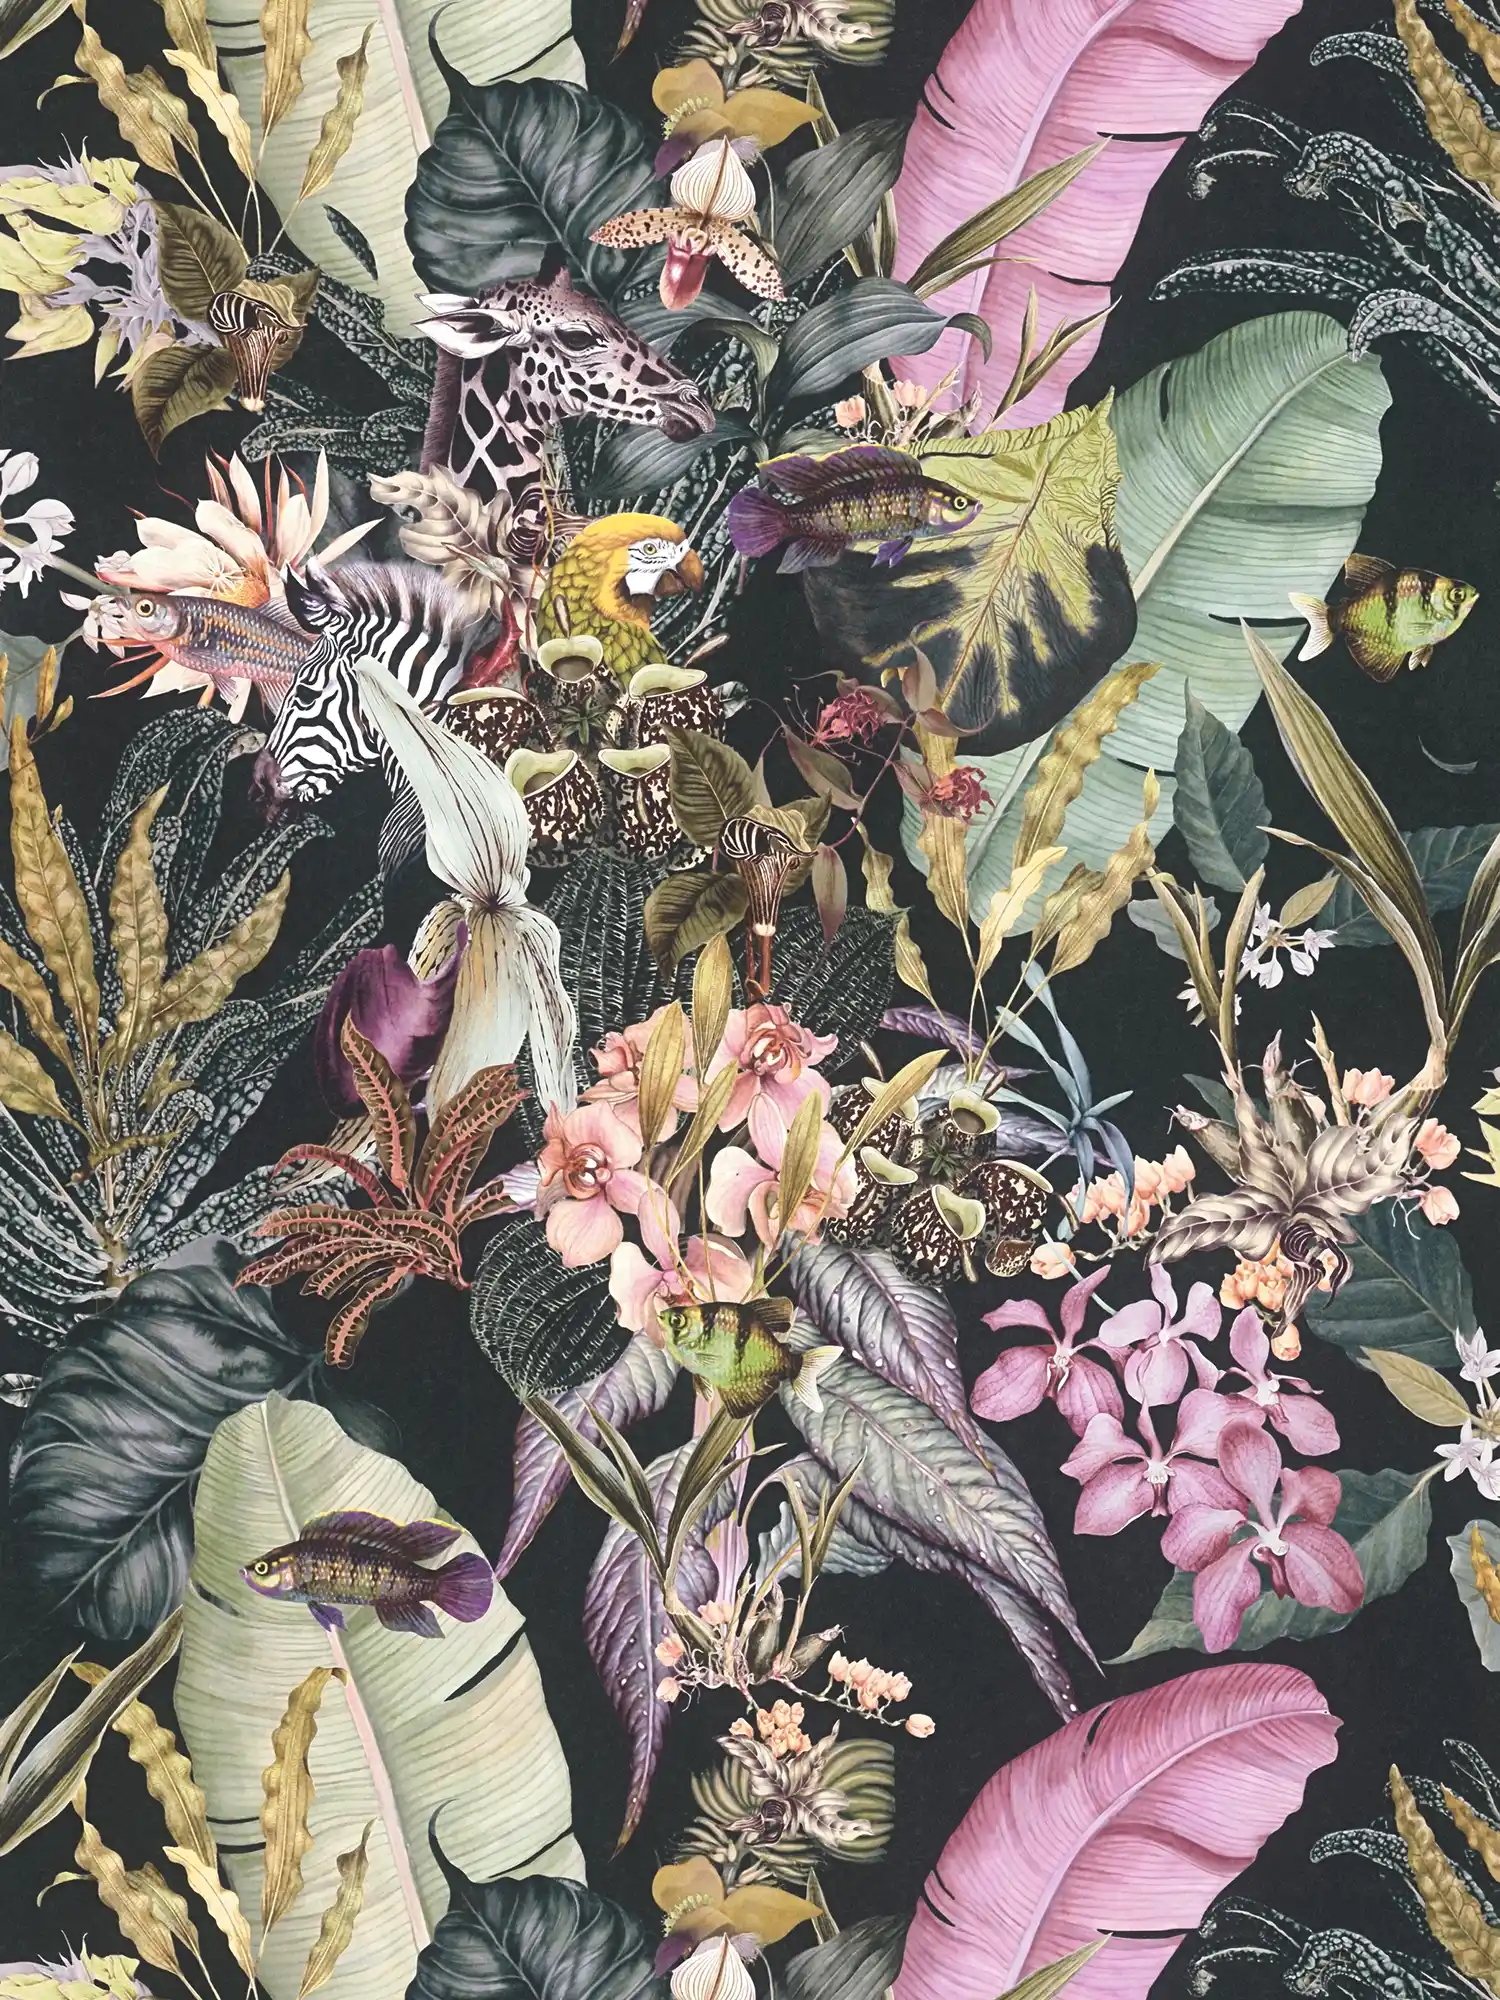             Flora & Fauna floral wallpaper with black background
        